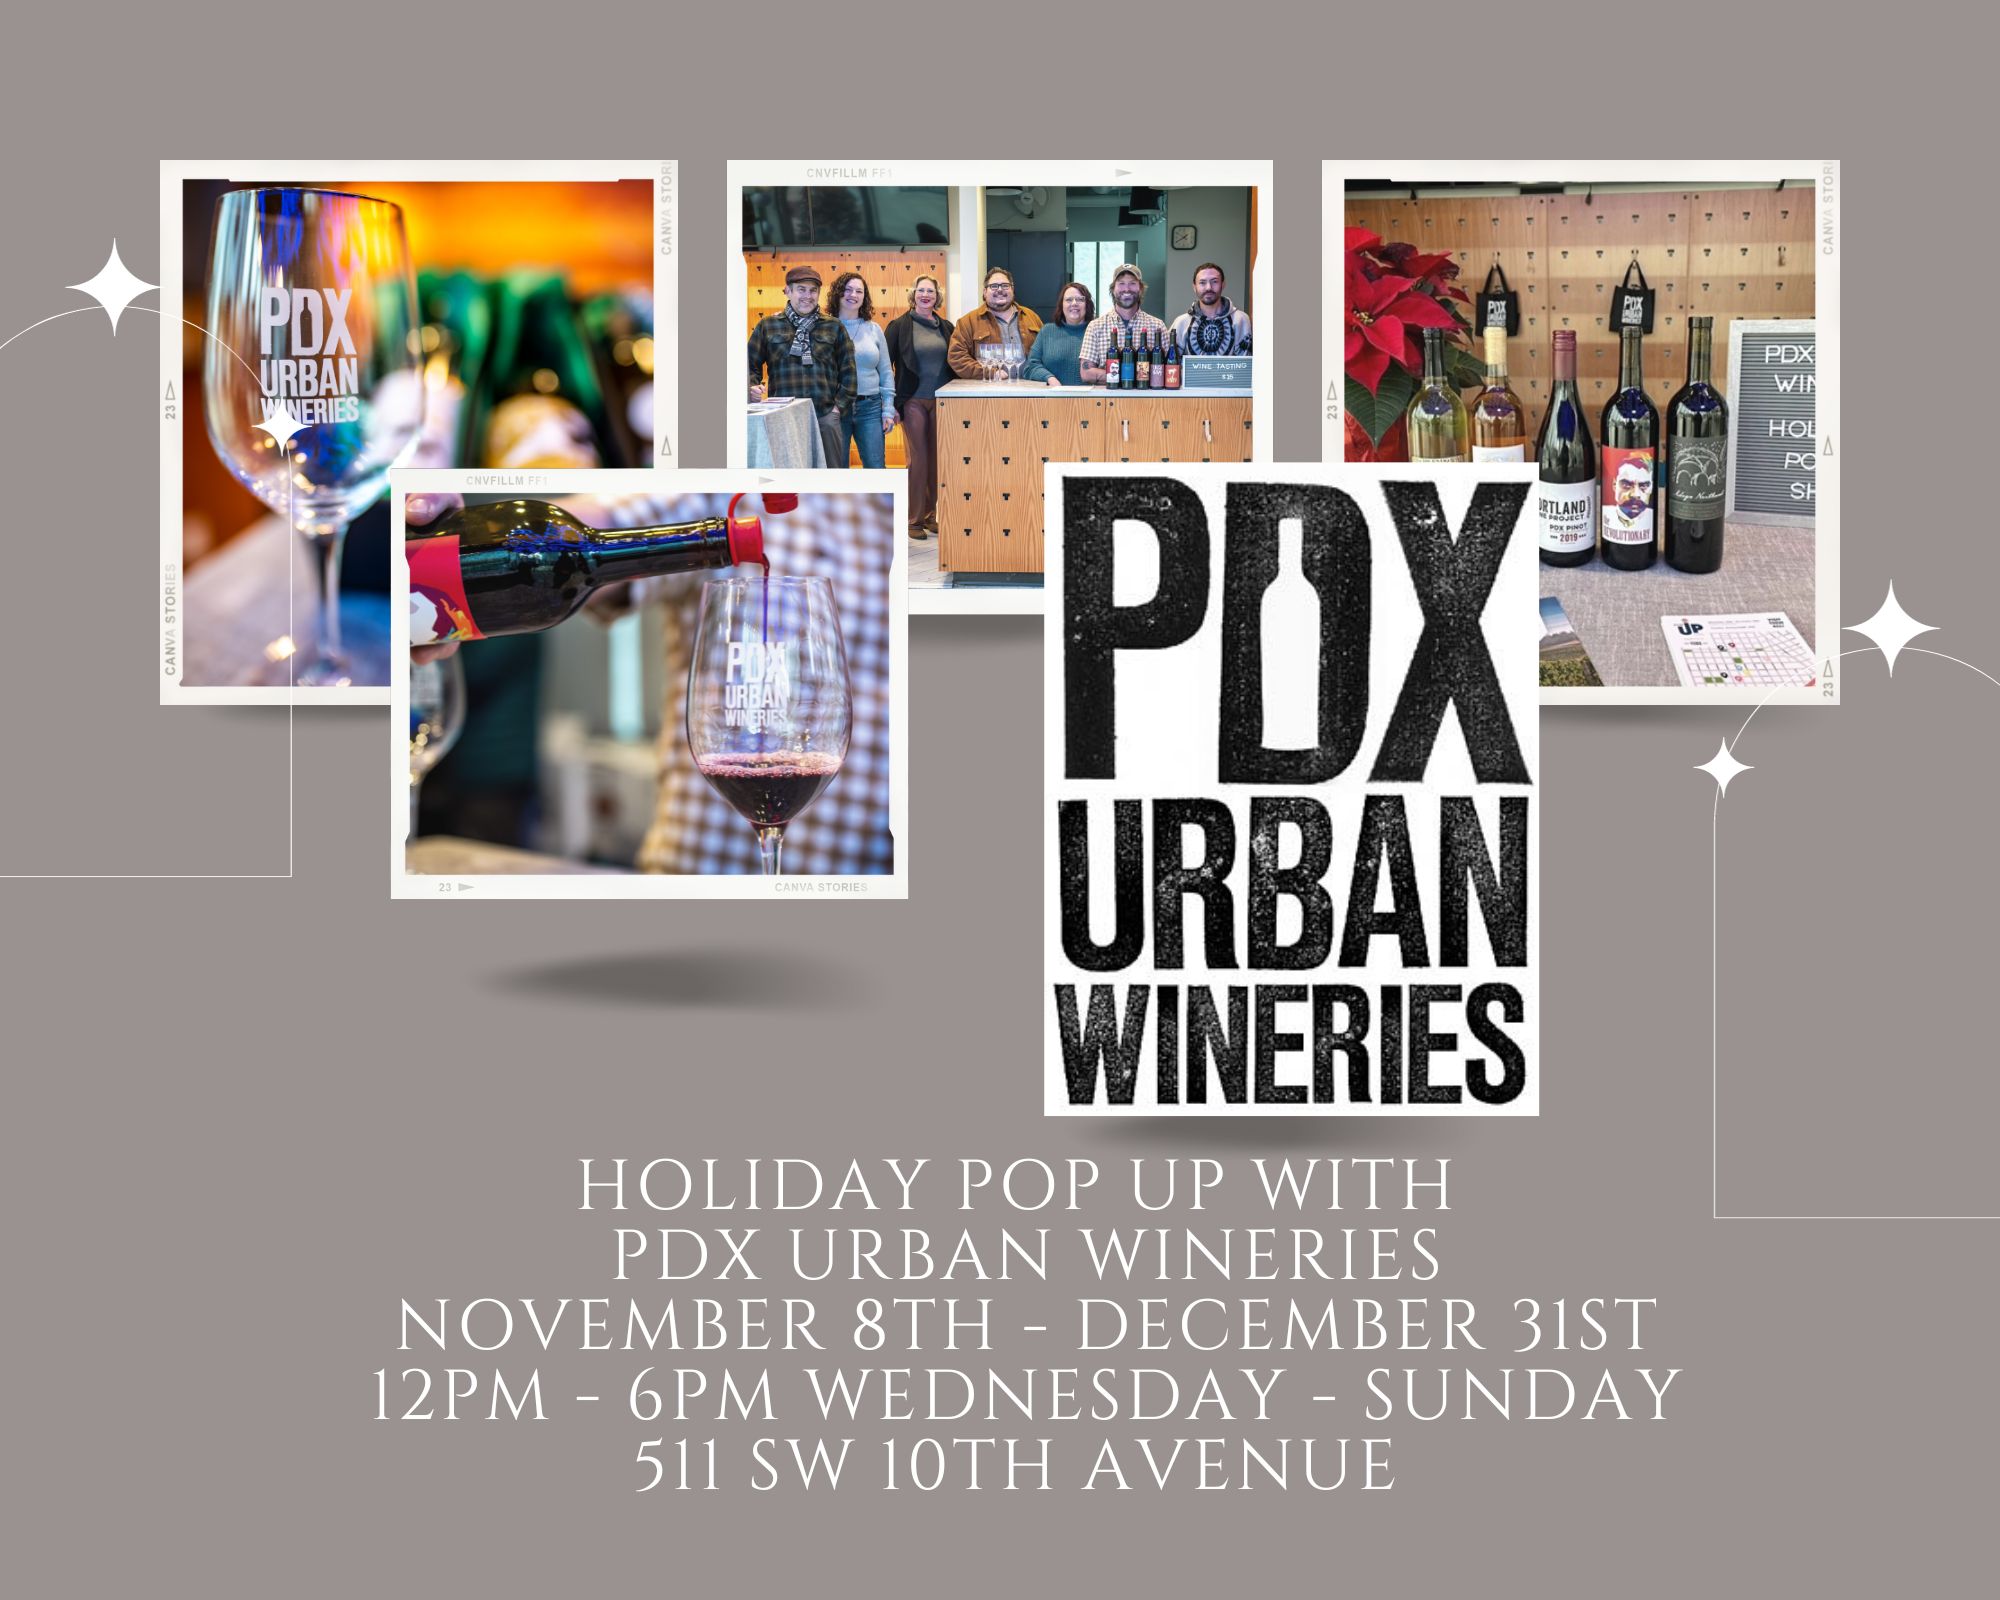 PDX Urban Wineries Holiday Pop Up Shop